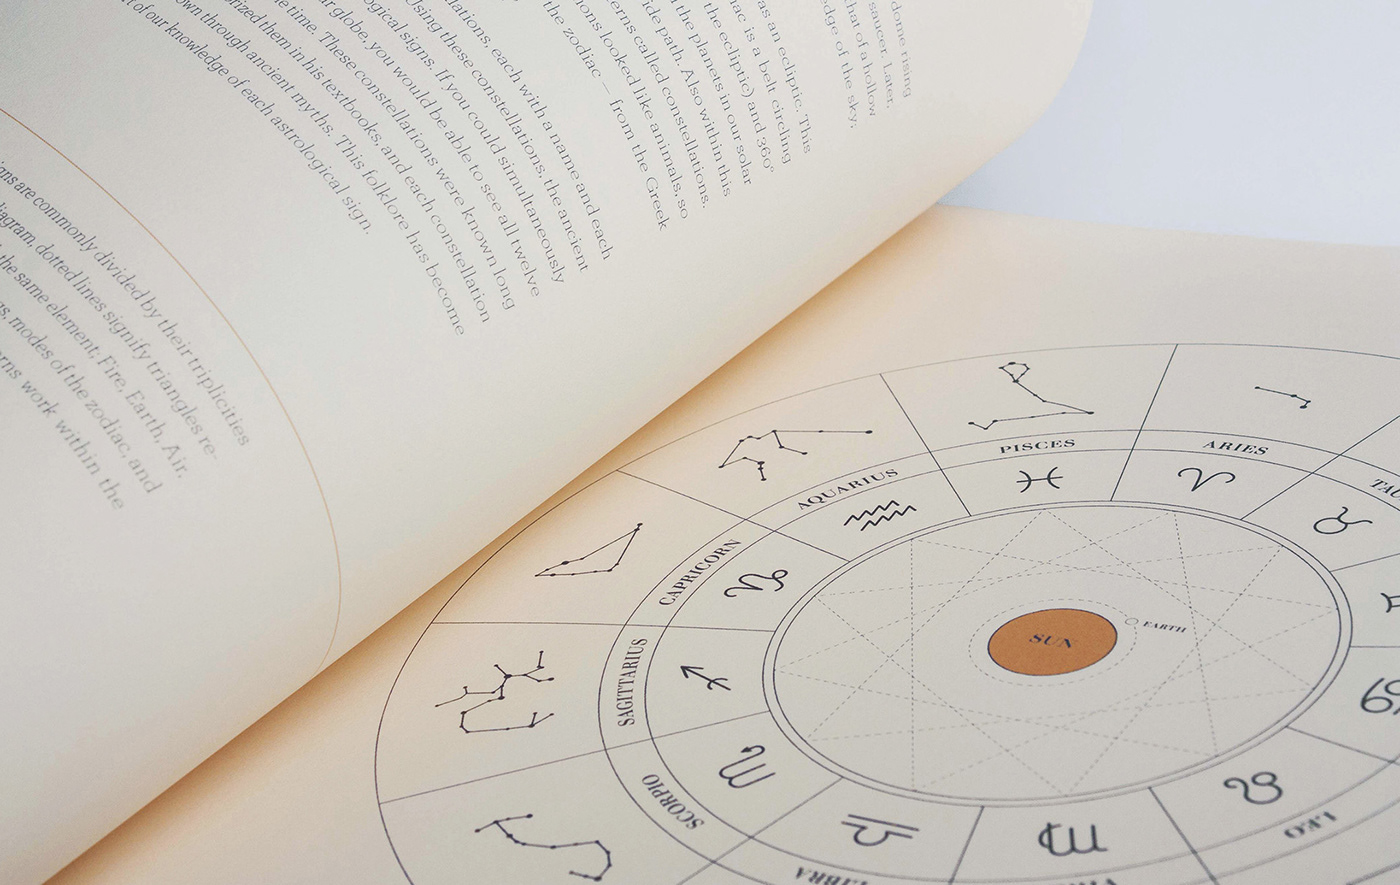 #print #book #Zodiac #constellation #STARS #astrology #bookbinding #navy #gold #history #astronomy  #glyph #signs